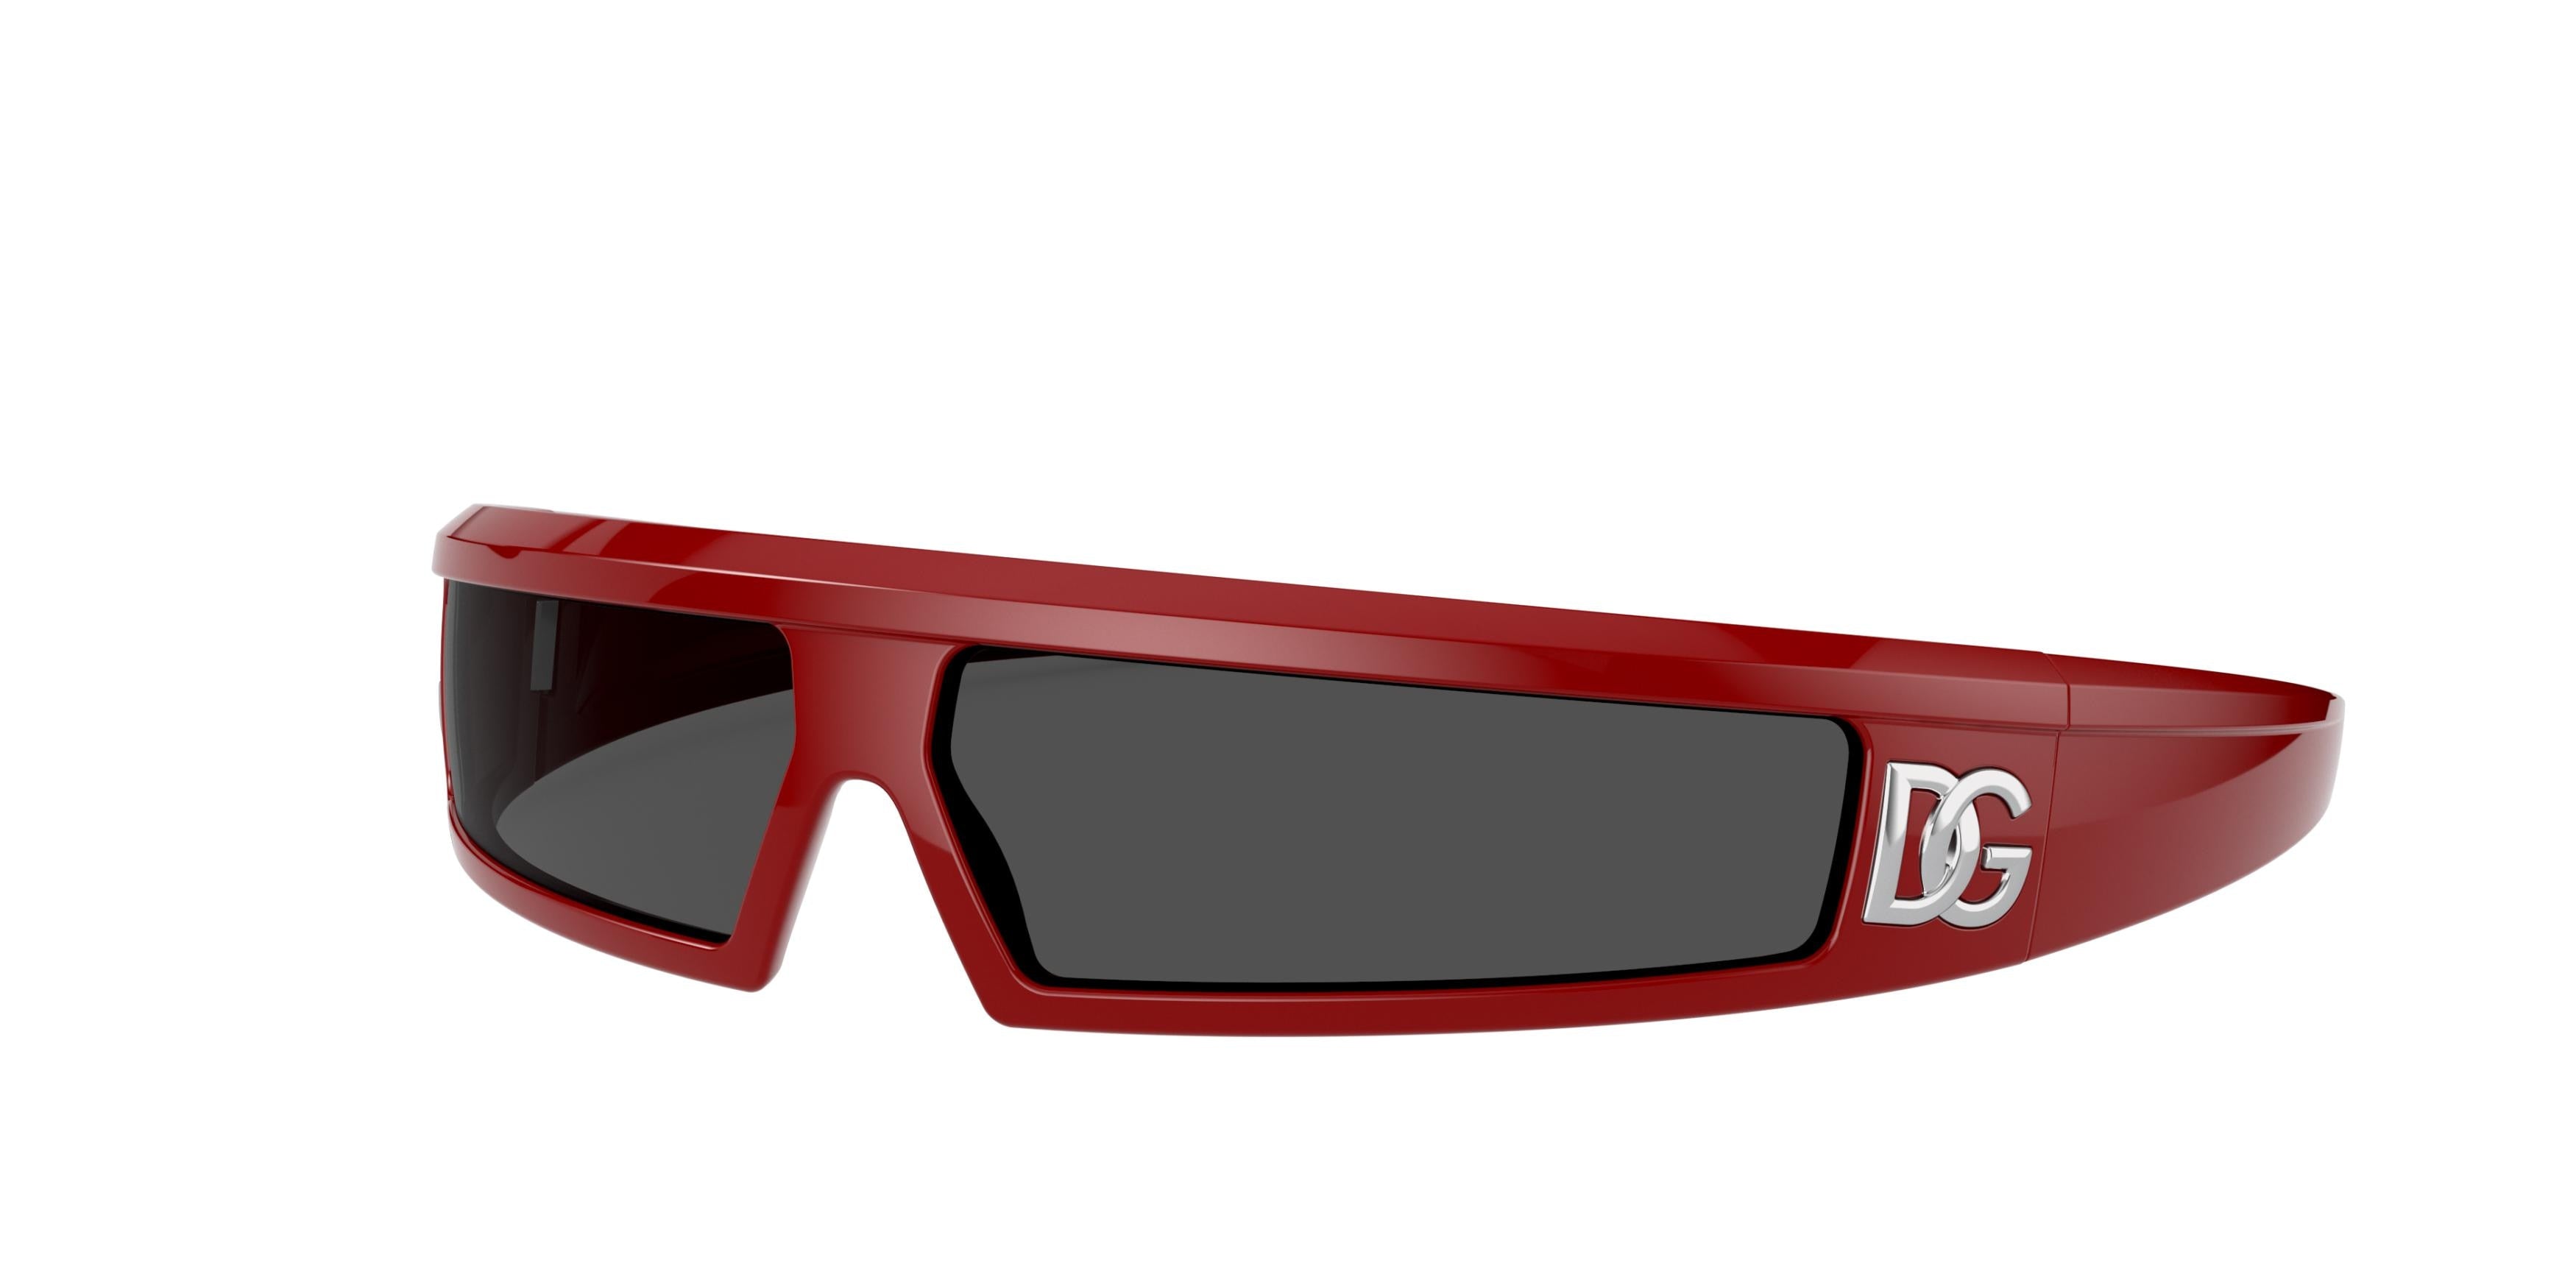 DOLCE & GABBANA DG6181 Rectangle Sunglasses  309887-Red 73-115-11 - Color Map Red